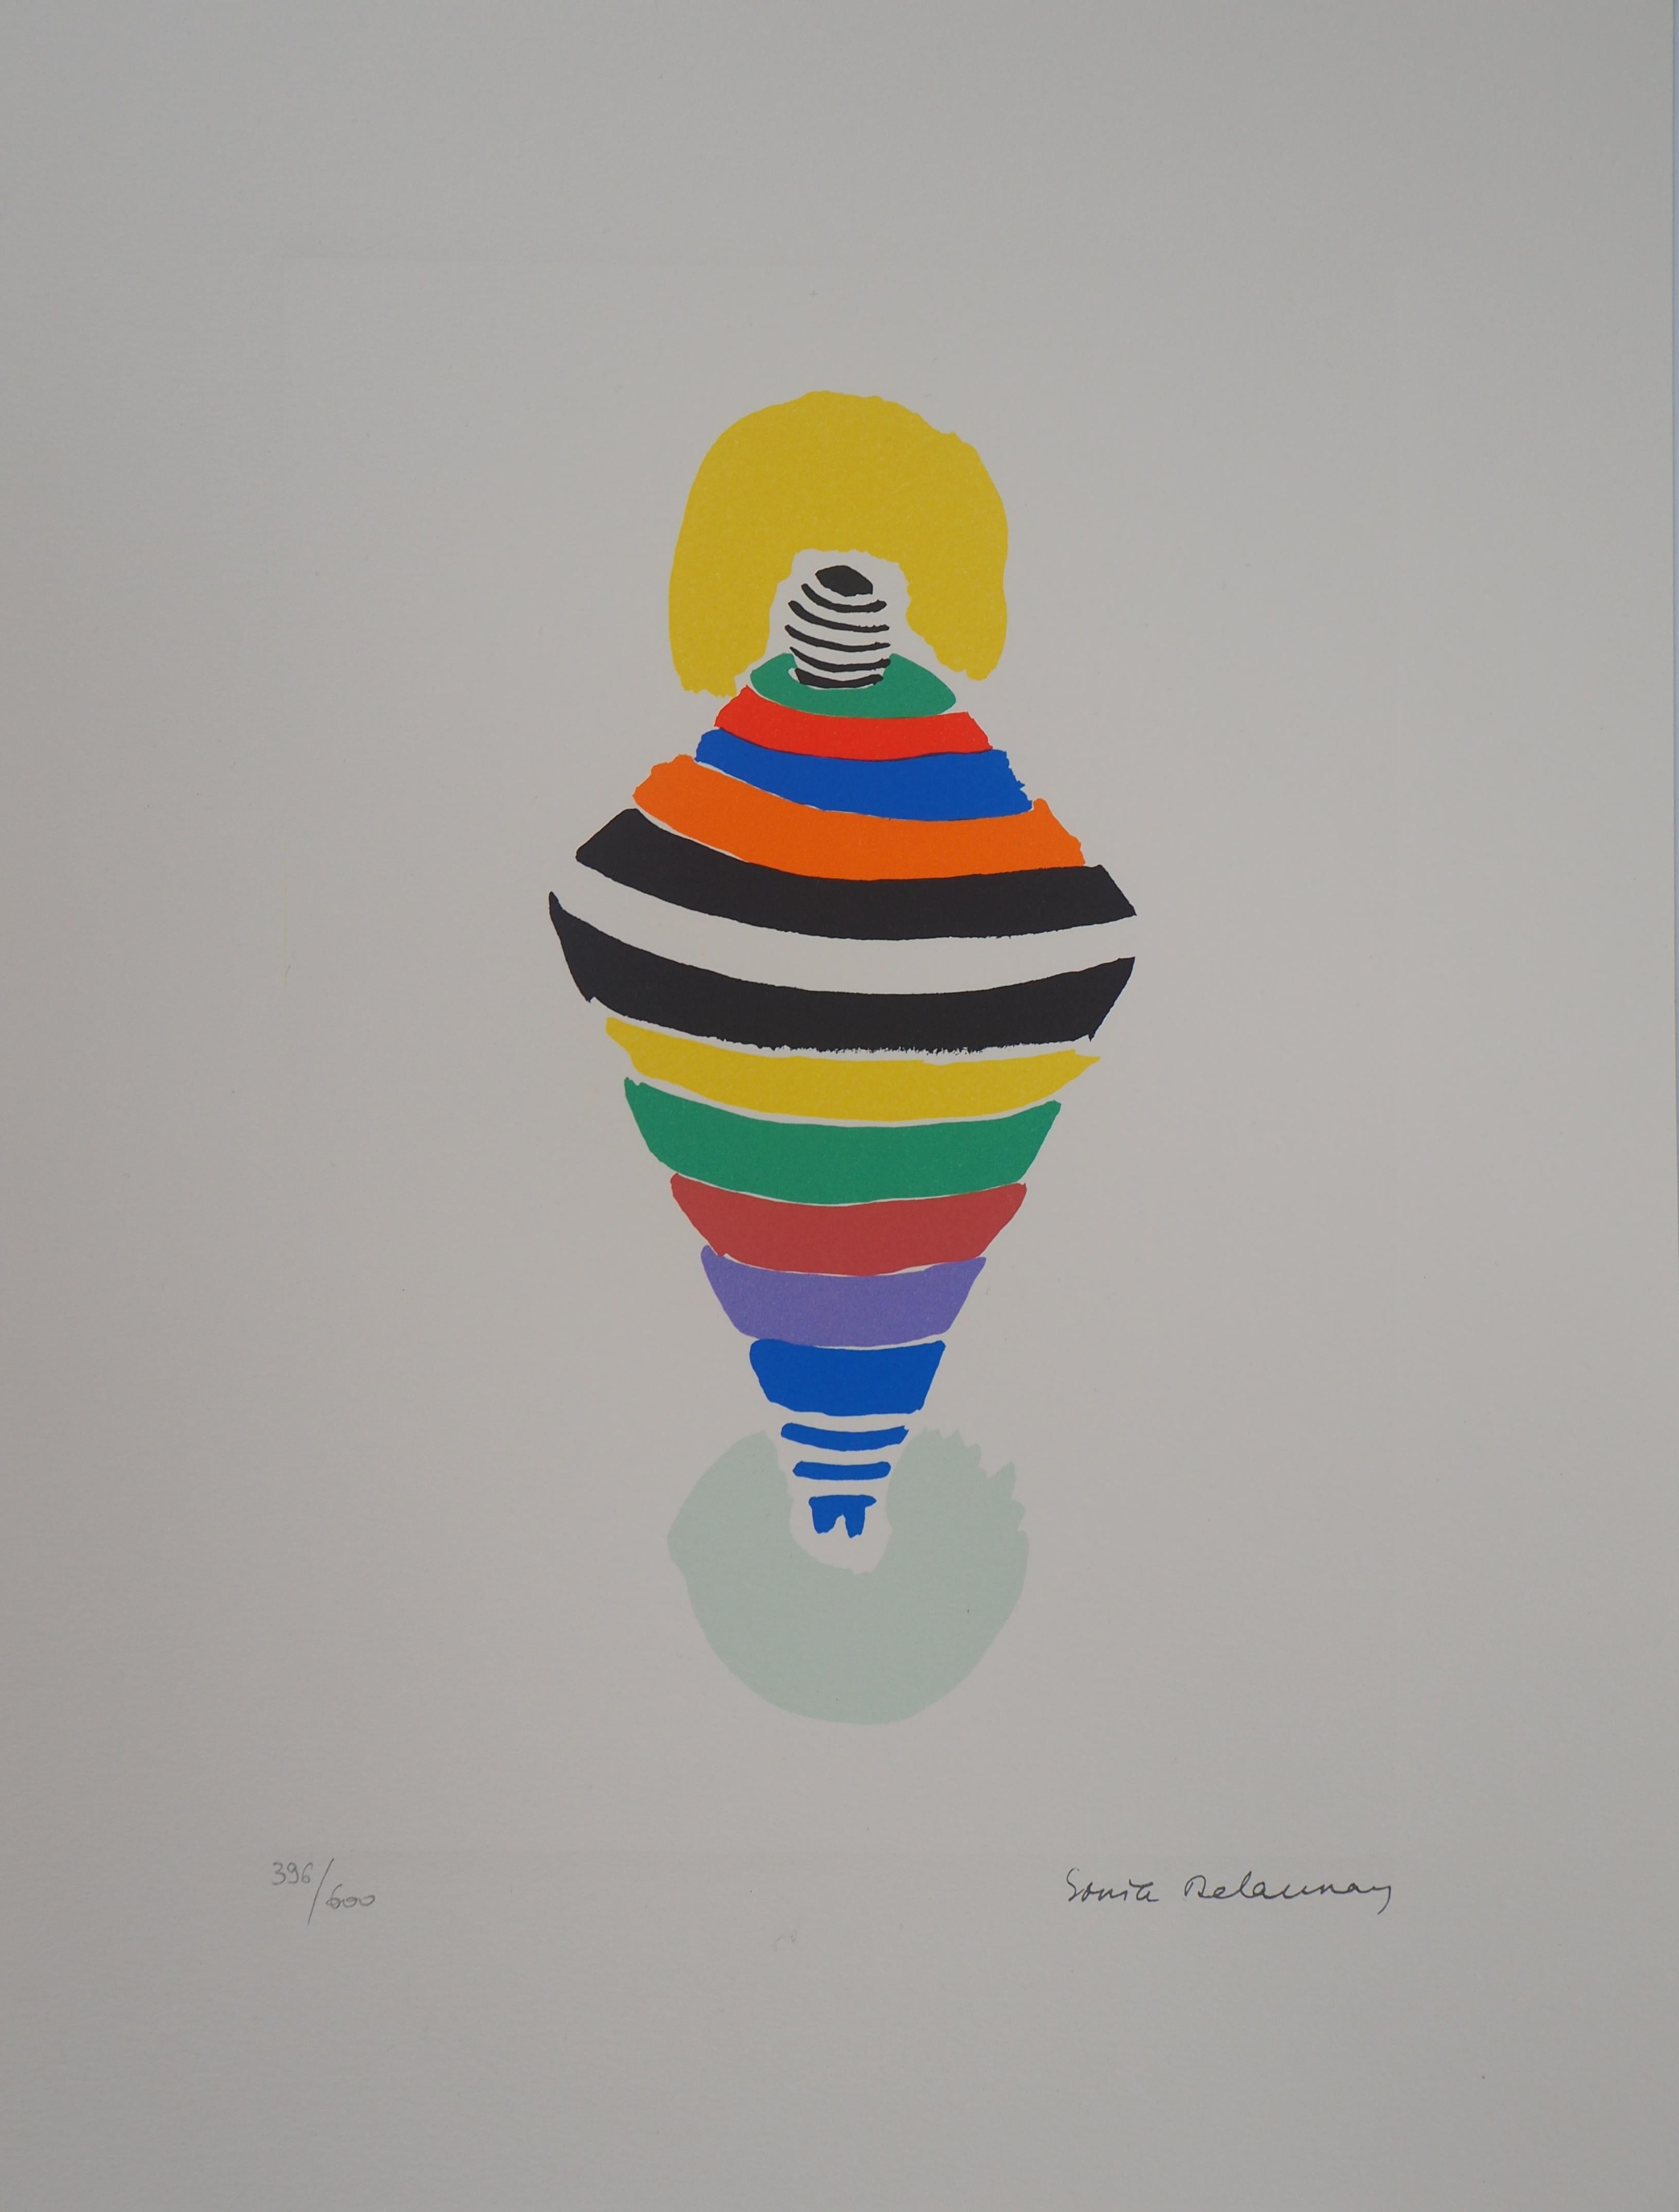 Sonia Delaunay Abstract Print - Rio Spinning Dress - Lithograph (Artcurial edition)